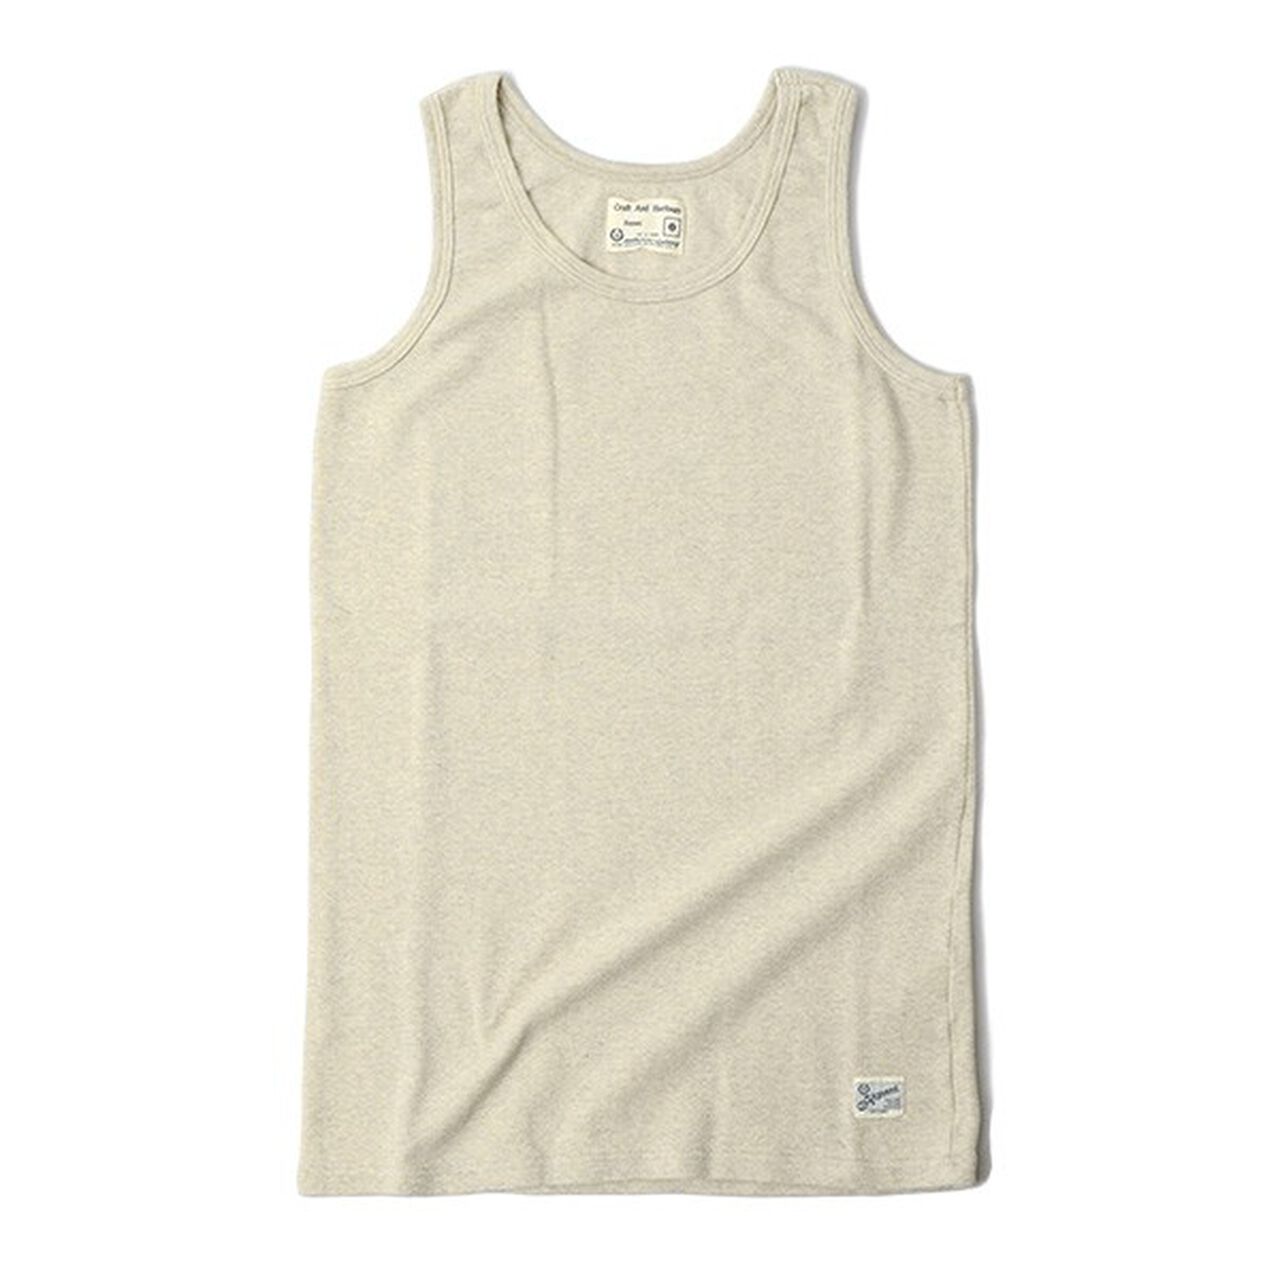 Raffy stretch milling tank top,Oatmeal, large image number 0